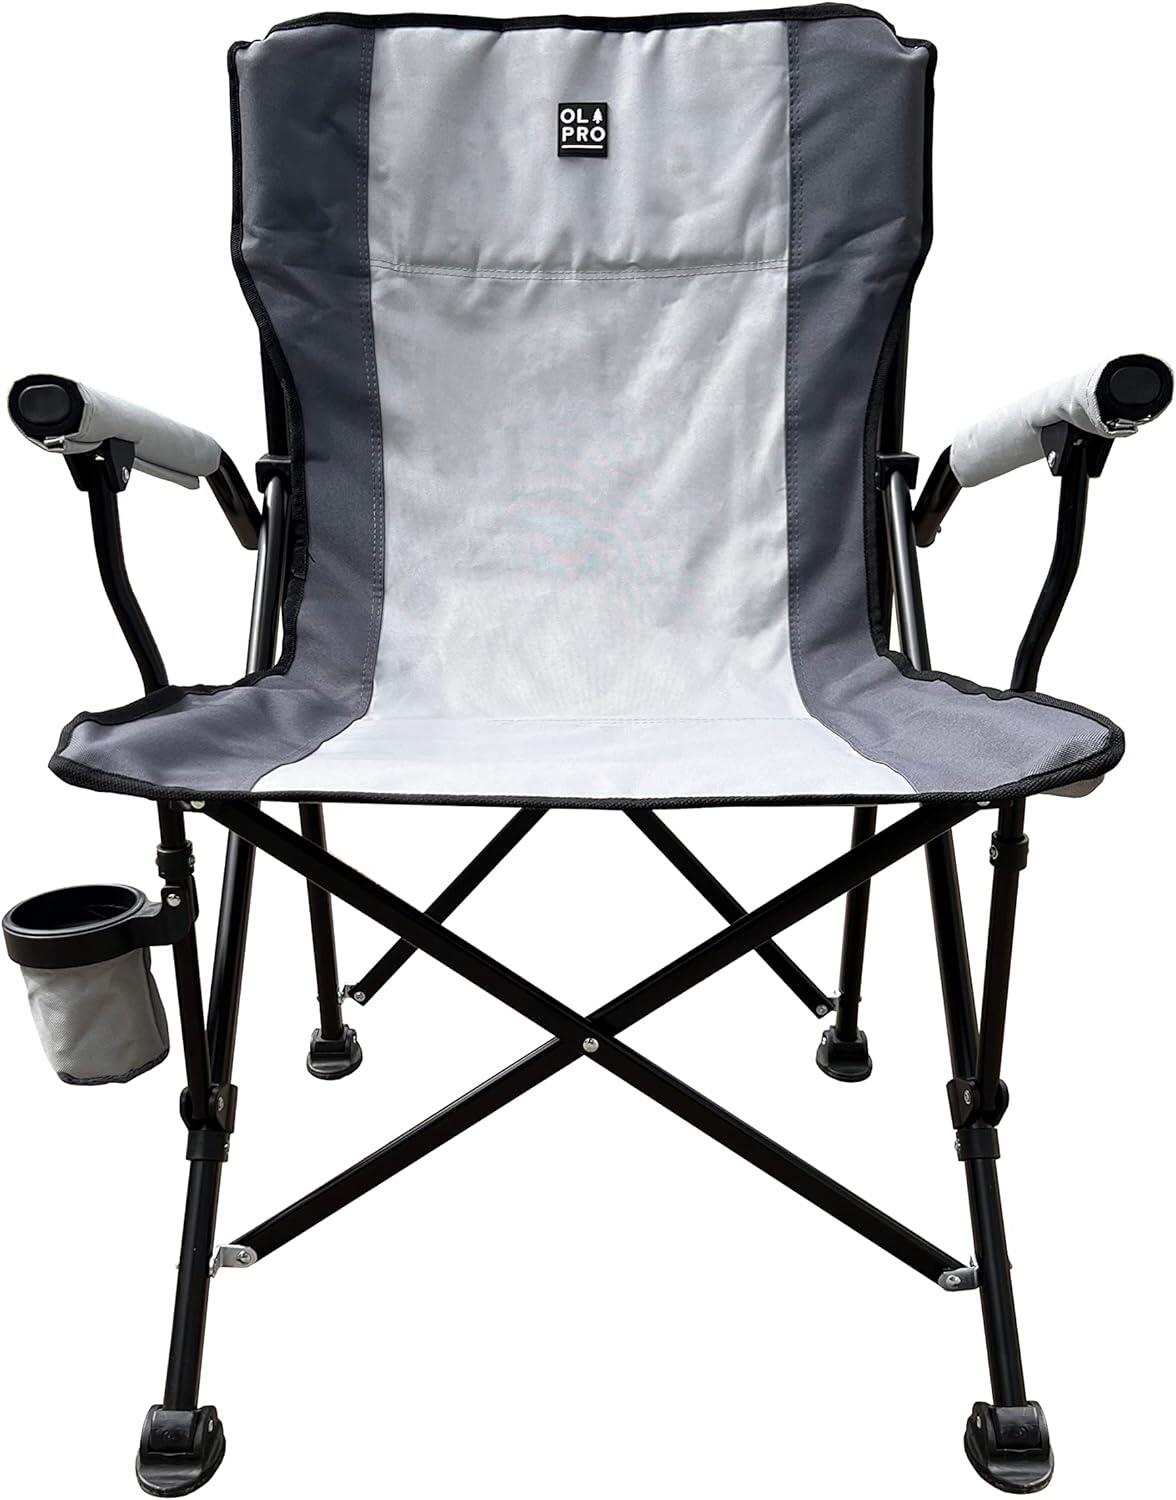 OLPRO Denali Deluxe Camping Chair for With Padded Arms and Back Support